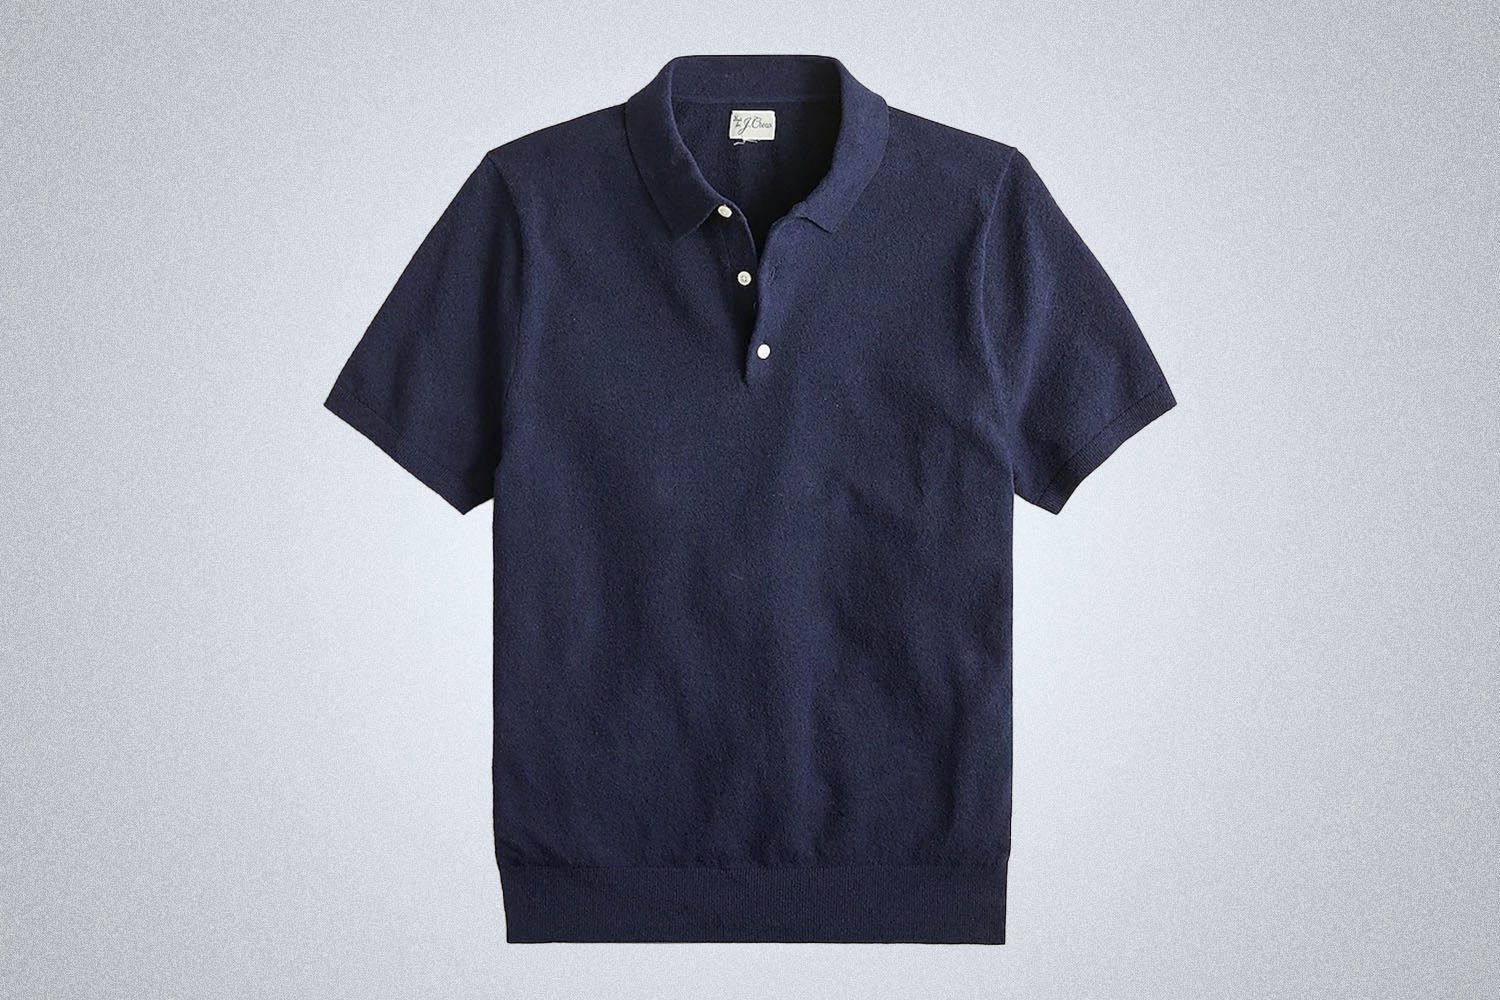 a navy sweater polo from J.Crew on a grey background